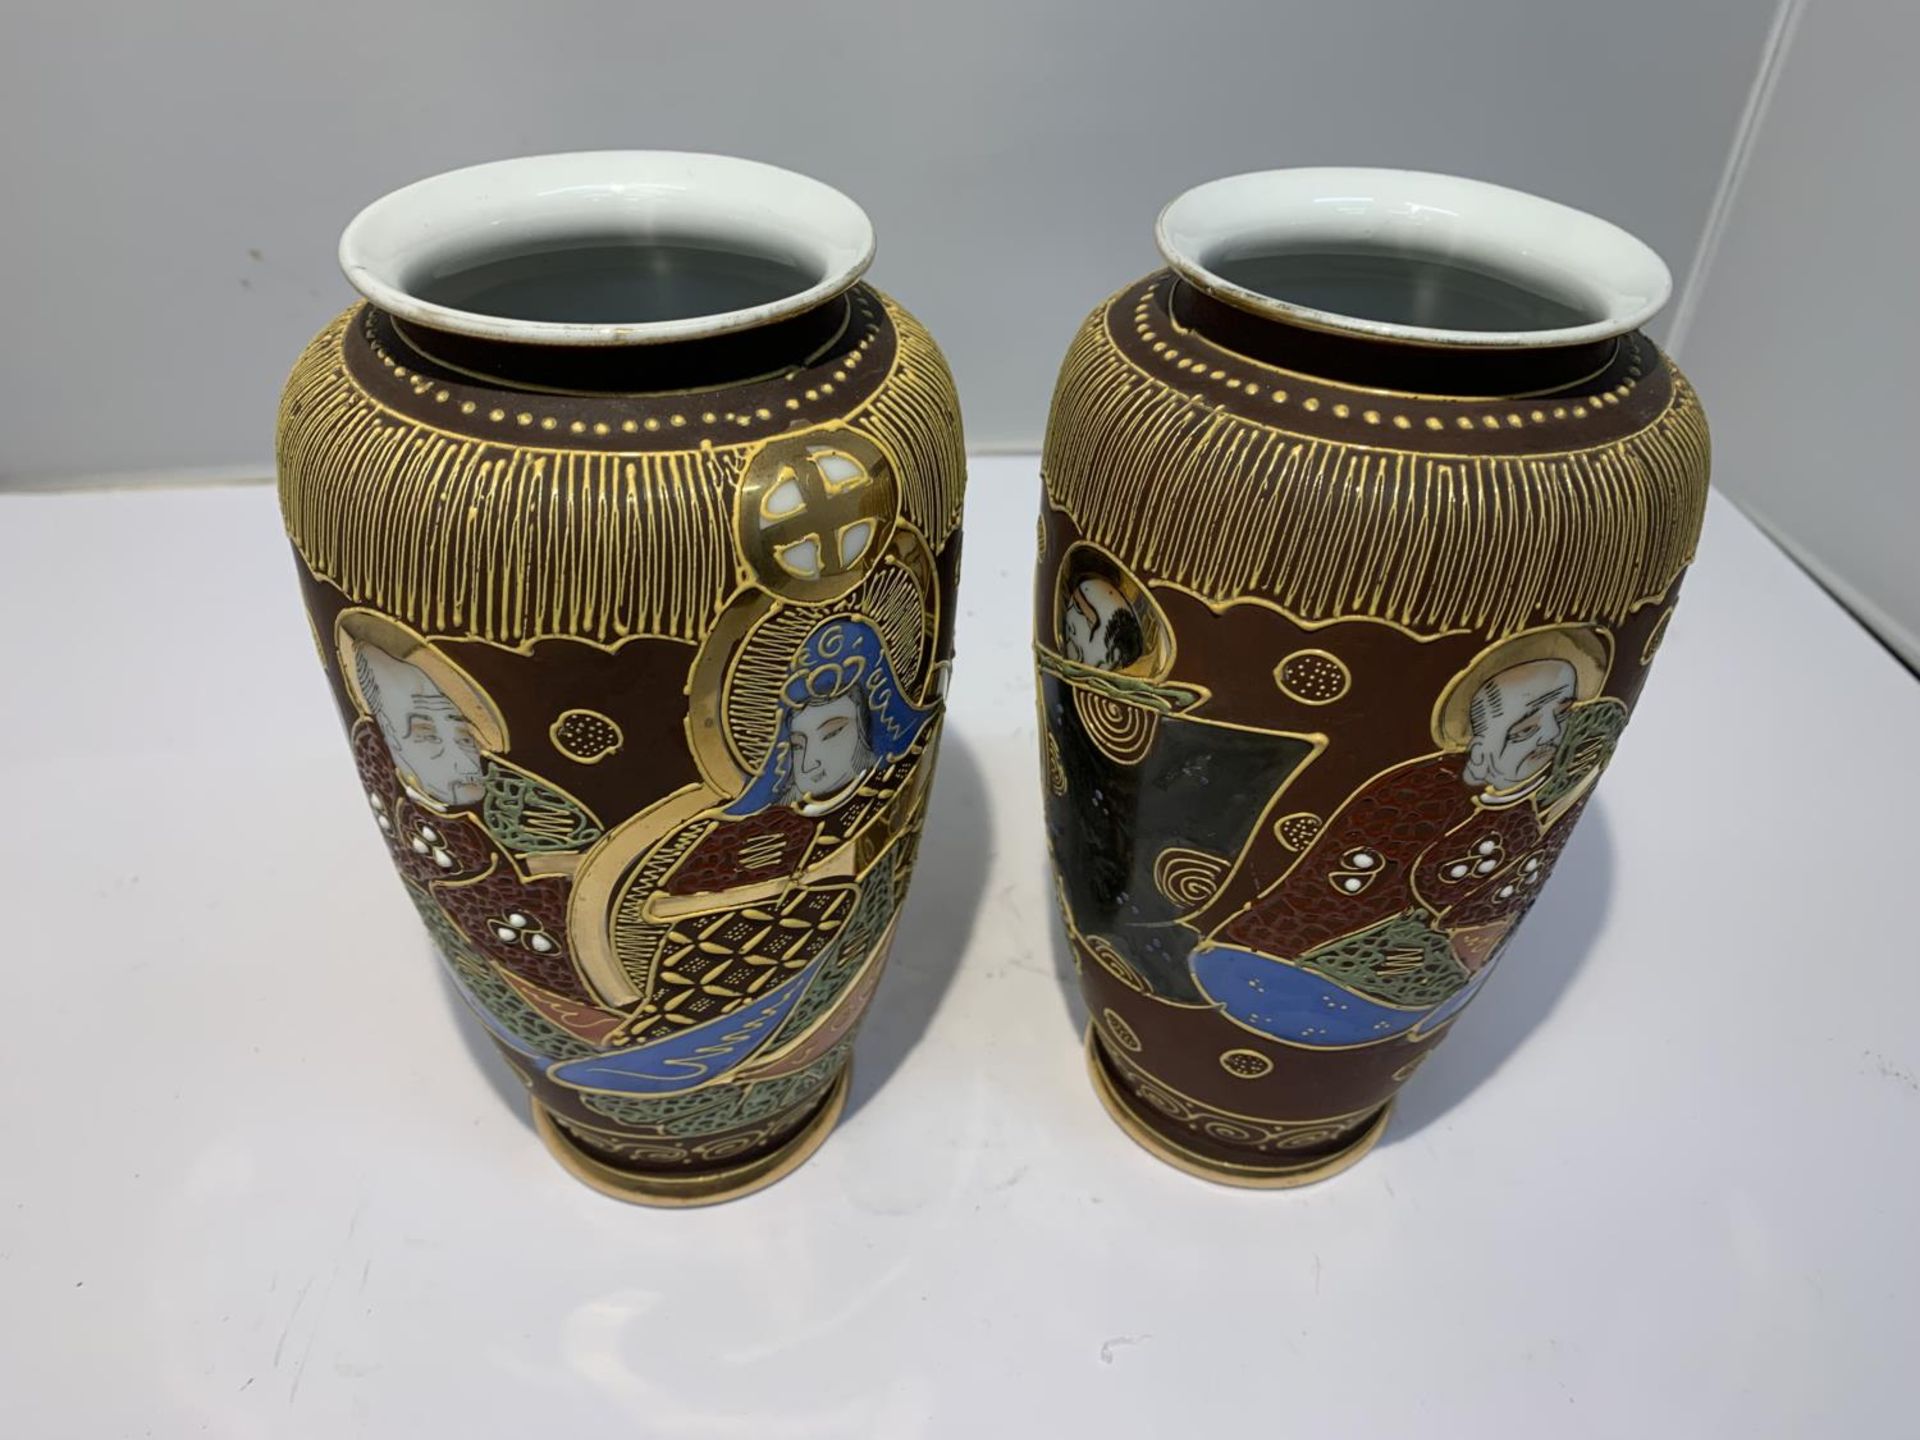 A PAIR OF SATSUMA VASES APPROXIMATE HEIGHT 7.25INCH - Image 2 of 5